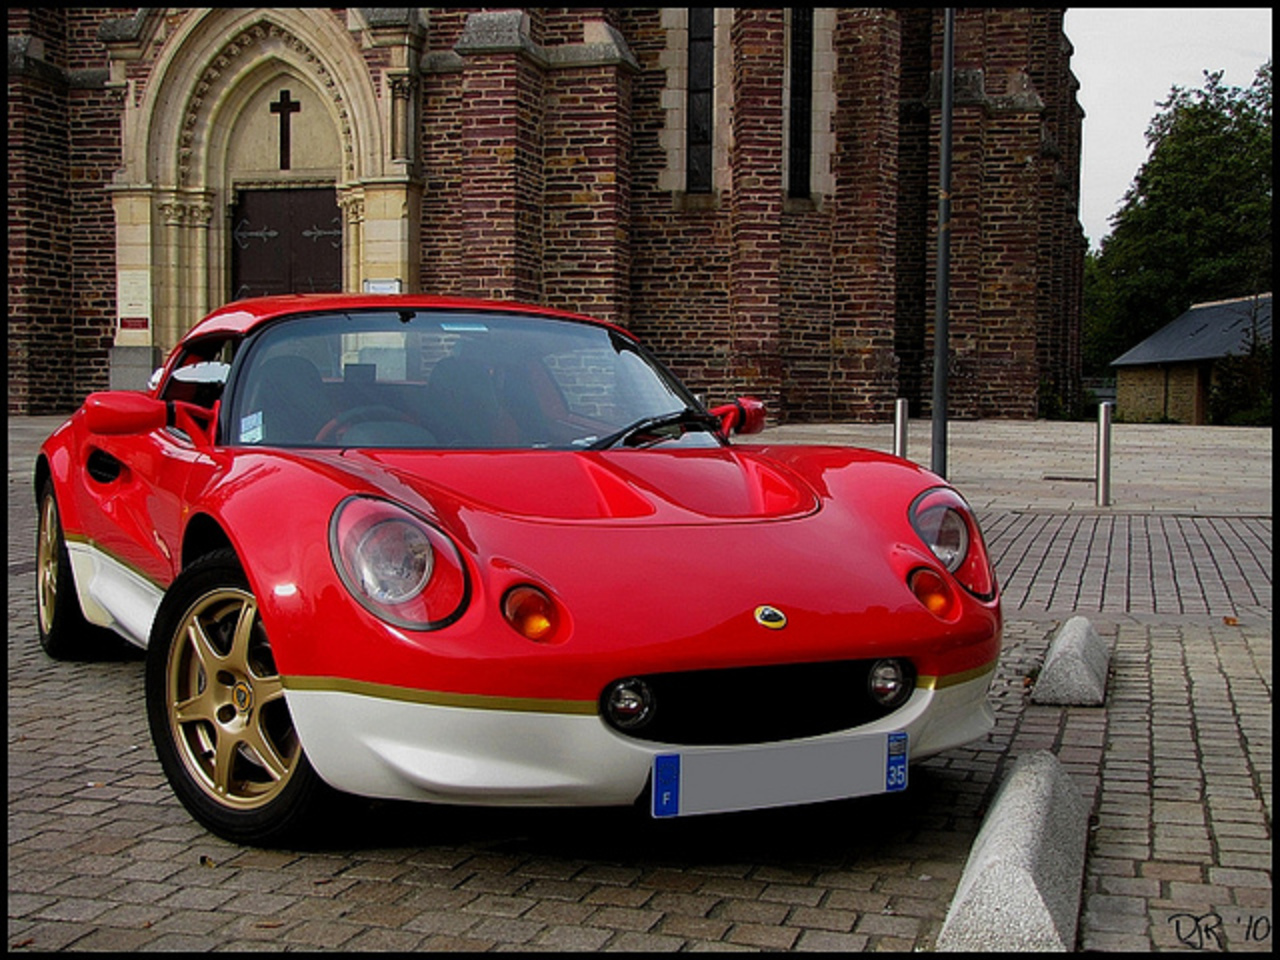 Lotus Elise 111S type 49 Photo Gallery: Photo #07 out of 9, Image ...